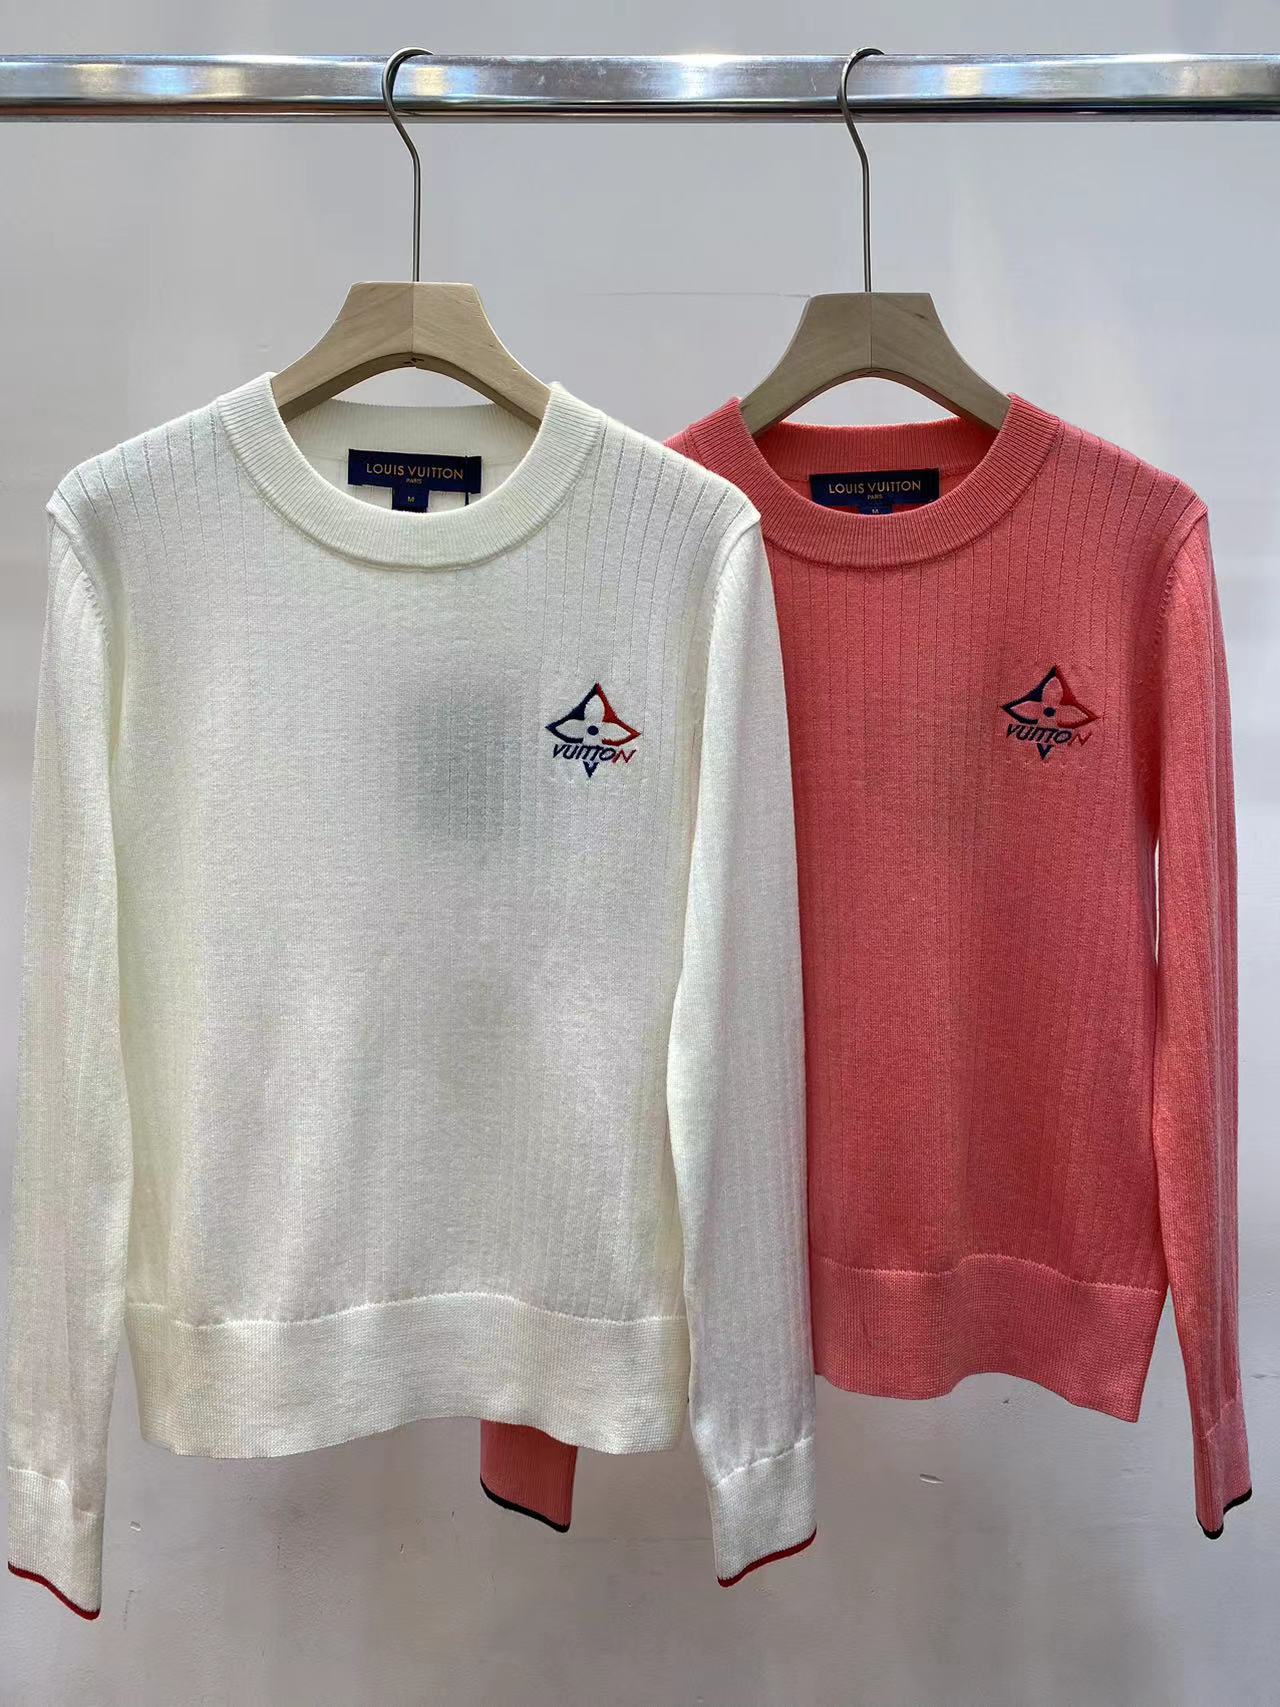 mirror copy luxury
 Louis Vuitton Clothing Knit Sweater Sweatshirts Buy Cheap
 Embroidery Knitting Spring Collection